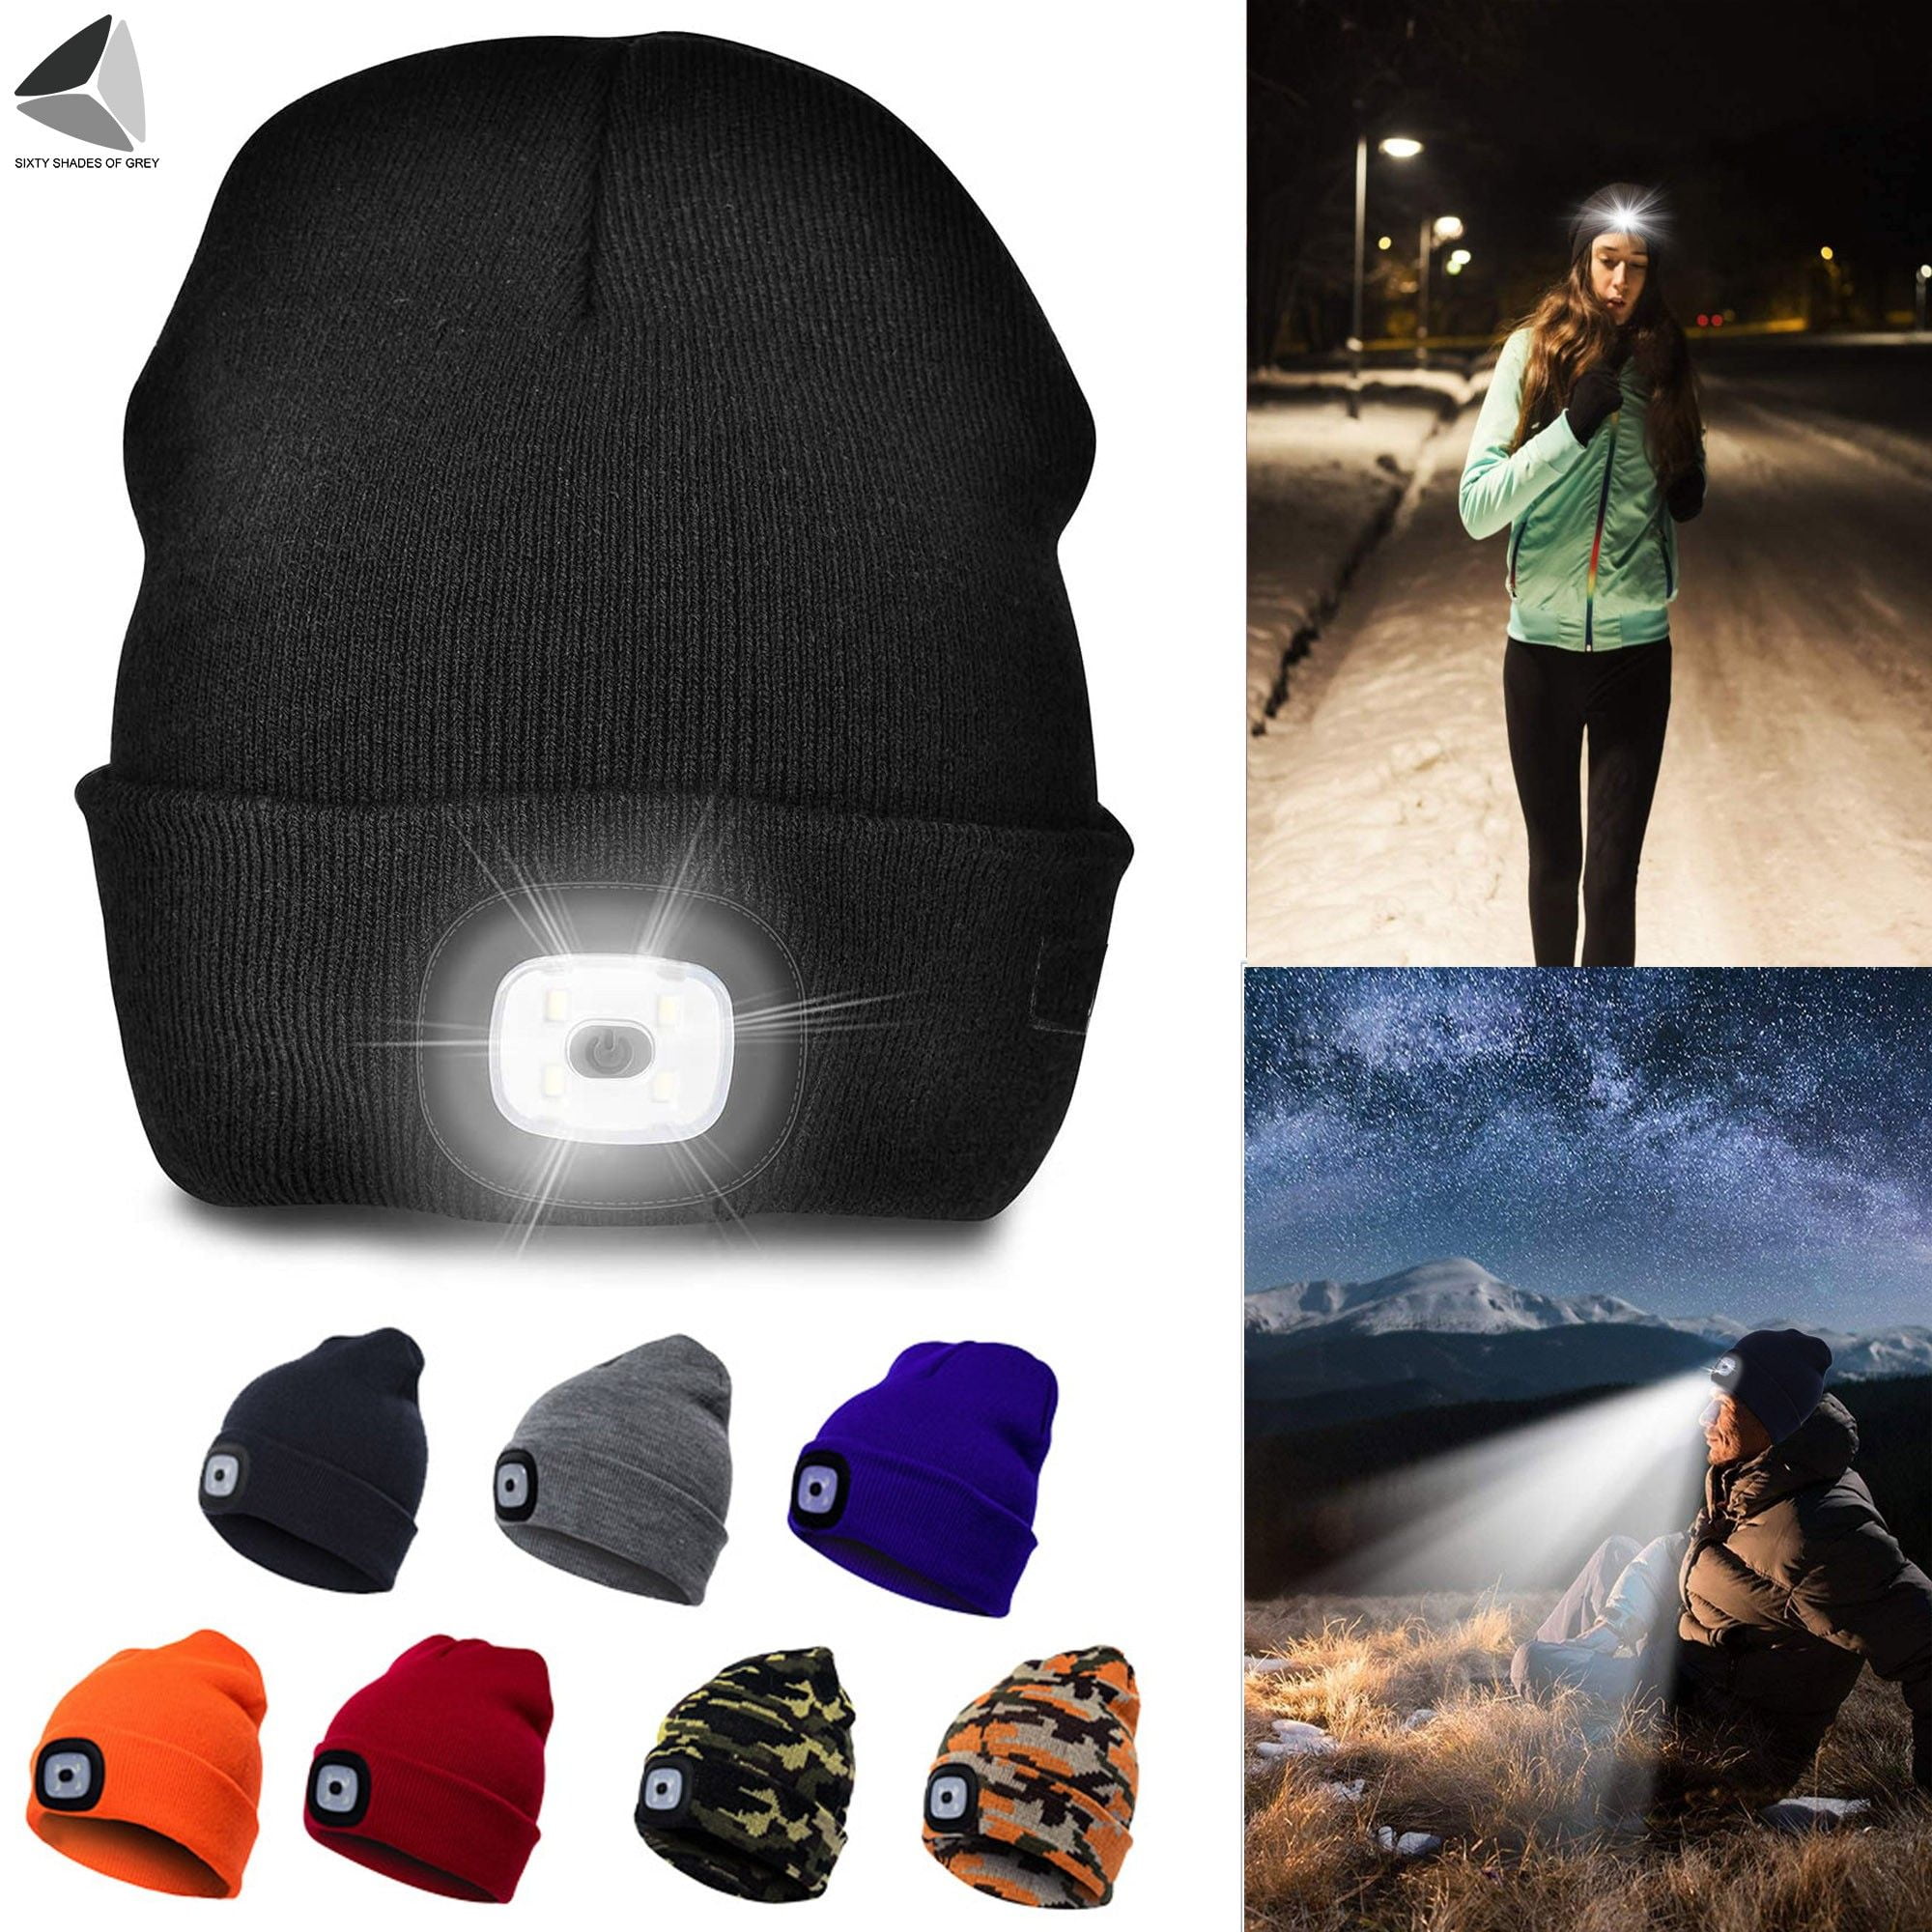 PUPOUSE Beanie Hat Headlight with LED Light Winter Womens Outdoor Hats & Headwear Warm Hands Free Camping Running Headlamp LED Headlight Hat 